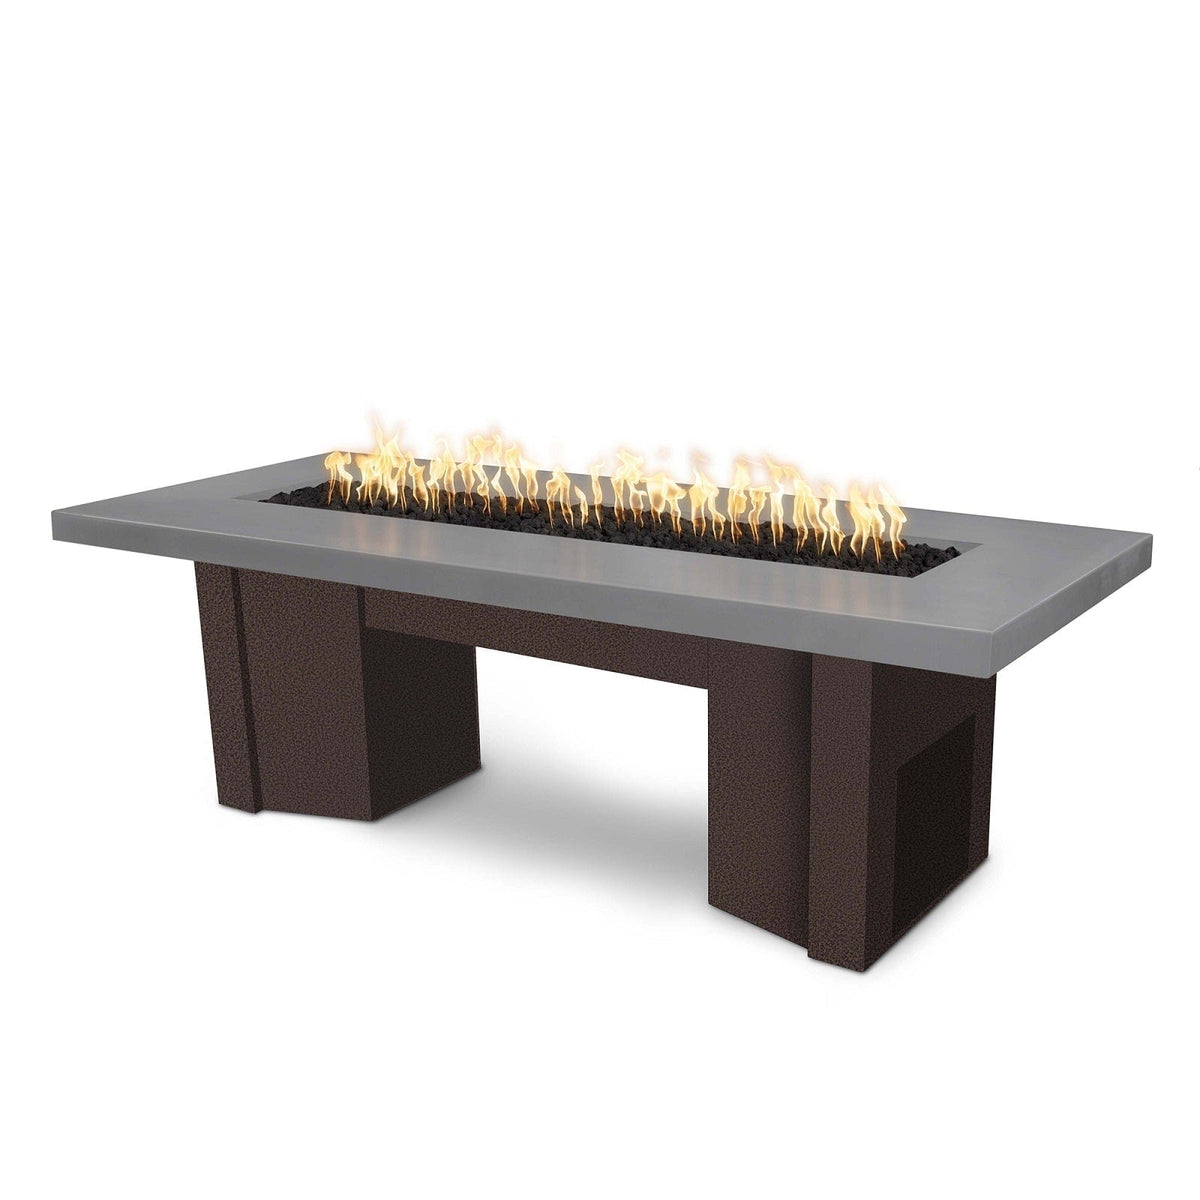 The Outdoor Plus Fire Features Natural Gray (-NGY) / Copper Vein Powder Coated Steel (-CPV) The Outdoor Plus 78&quot; Alameda Fire Table Smooth Concrete in Natural Gas - Match Lit with Flame Sense System / OPT-ALMGFRC78FSML-NG